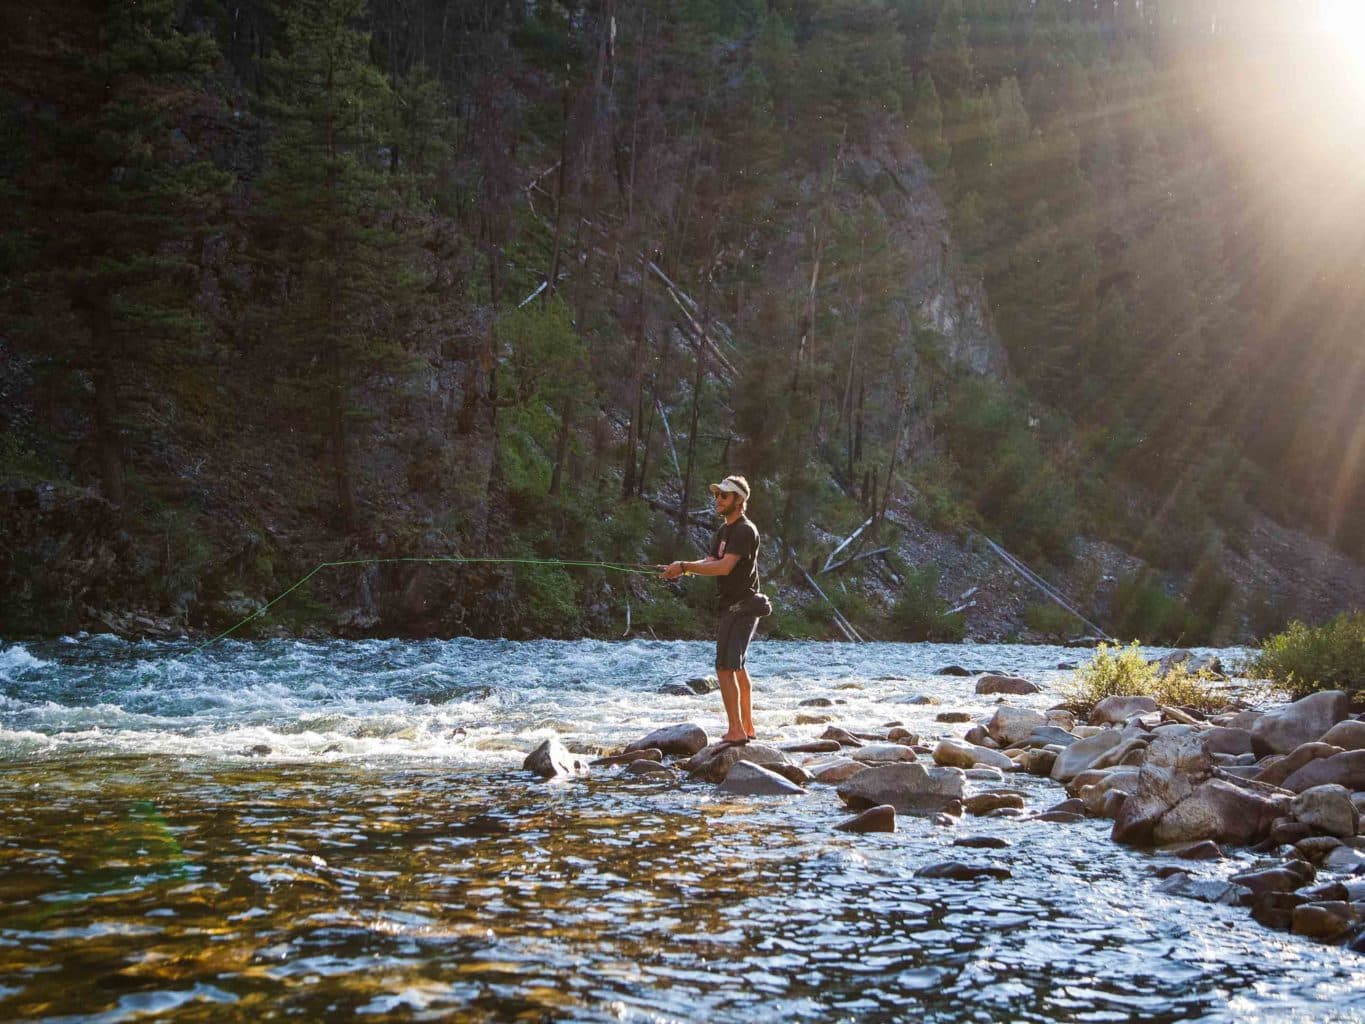 A fly fisherman on the Middle Fork